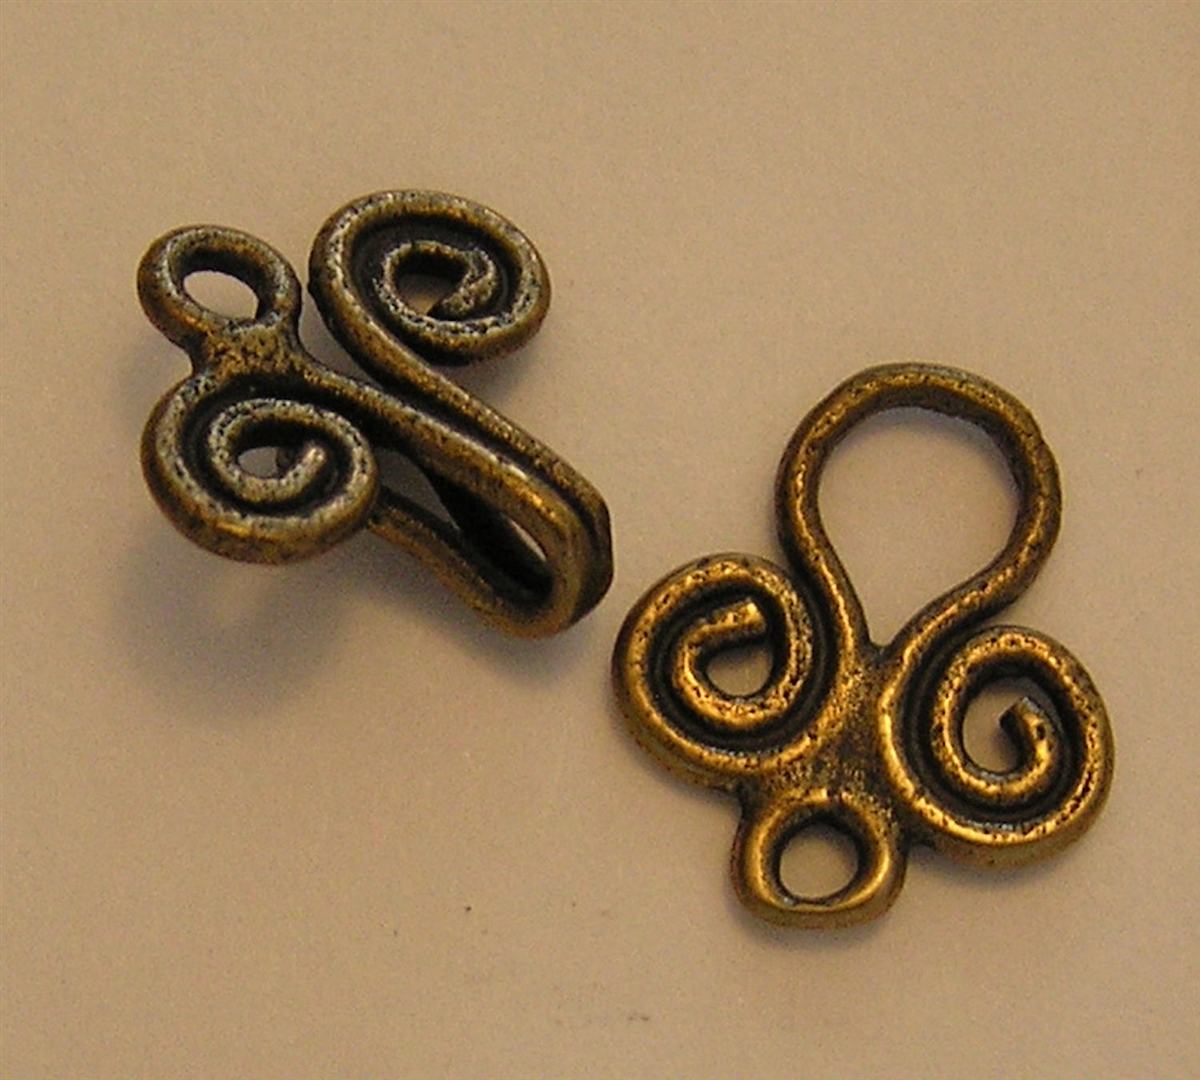 Handmade Hook and Eye Clasp - 1 1/4 - Antique or Vintage Model, in  Sterling Silver or Bronze